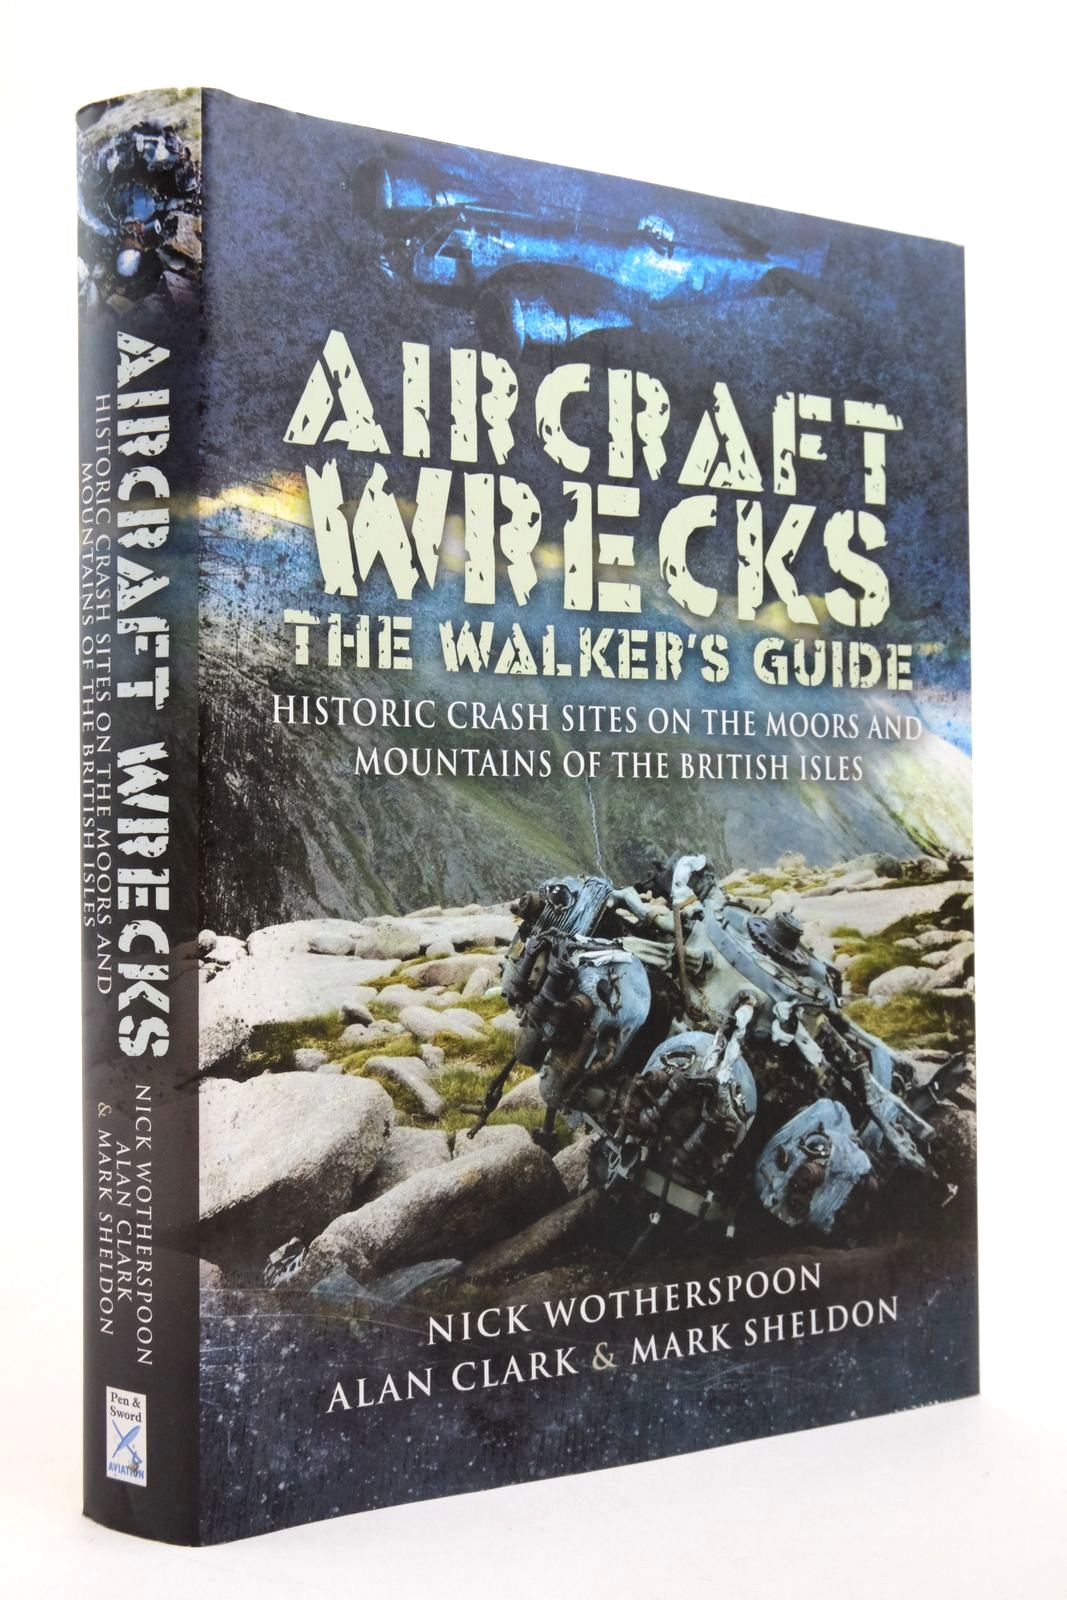 Photo of AIRCRAFT WRECKS THE WALKERS GUIDE: HISTORIC CRASH SITES ON THE MOORS AND MOUNTAINS OF THE BRITISH ISLES written by Wotherspoon, Nick Clark, Alan Sheldon, Mark published by Pen &amp; Sword Aviation (STOCK CODE: 2138873)  for sale by Stella & Rose's Books